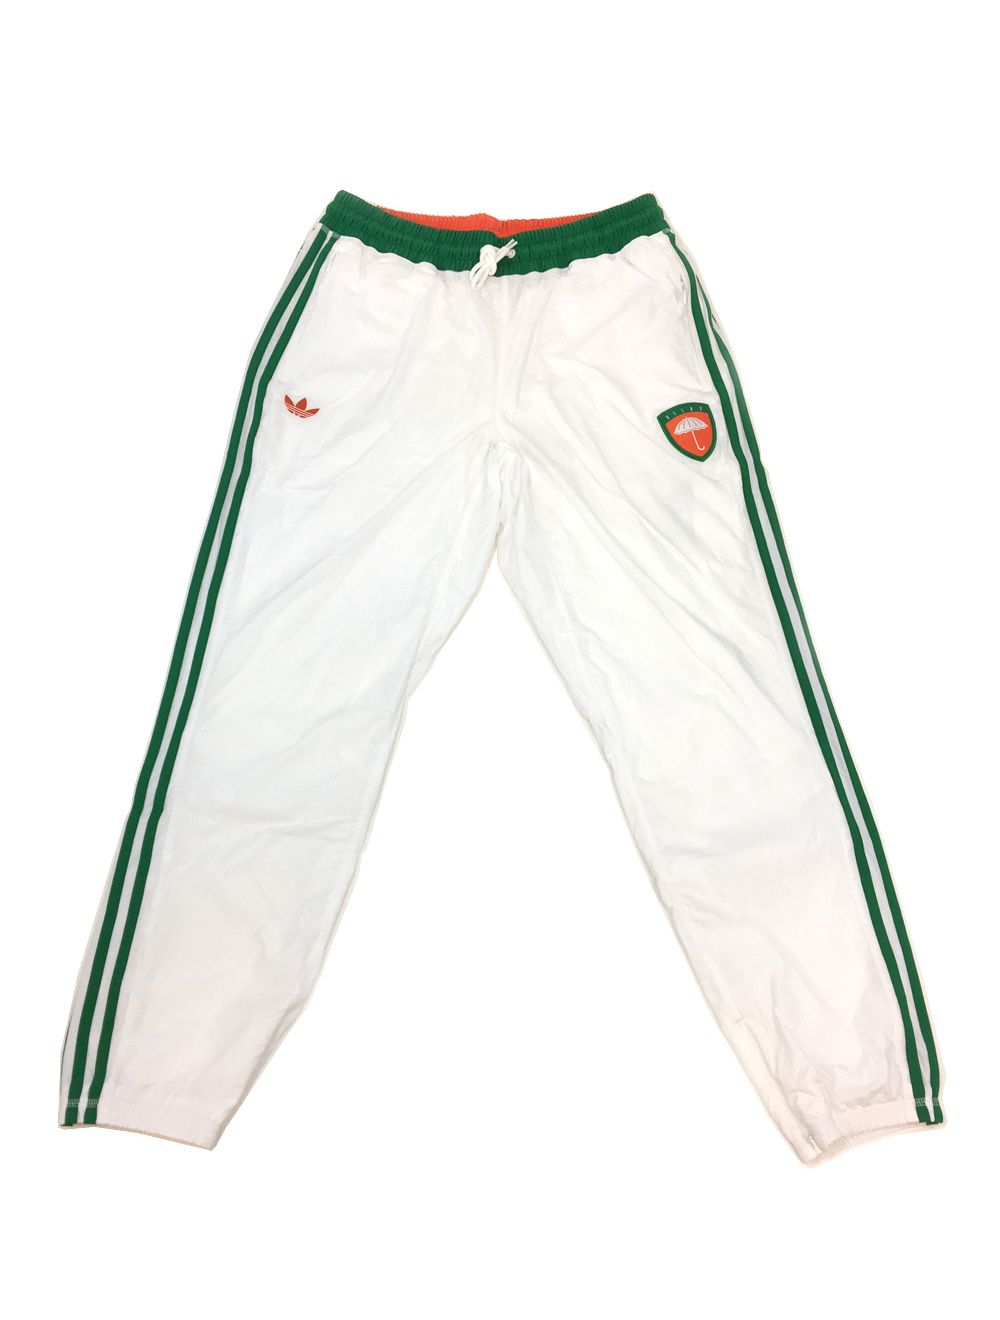 Person in charge of sports game Accuracy Nerve adidas x Helas Track Pants. White/Green.